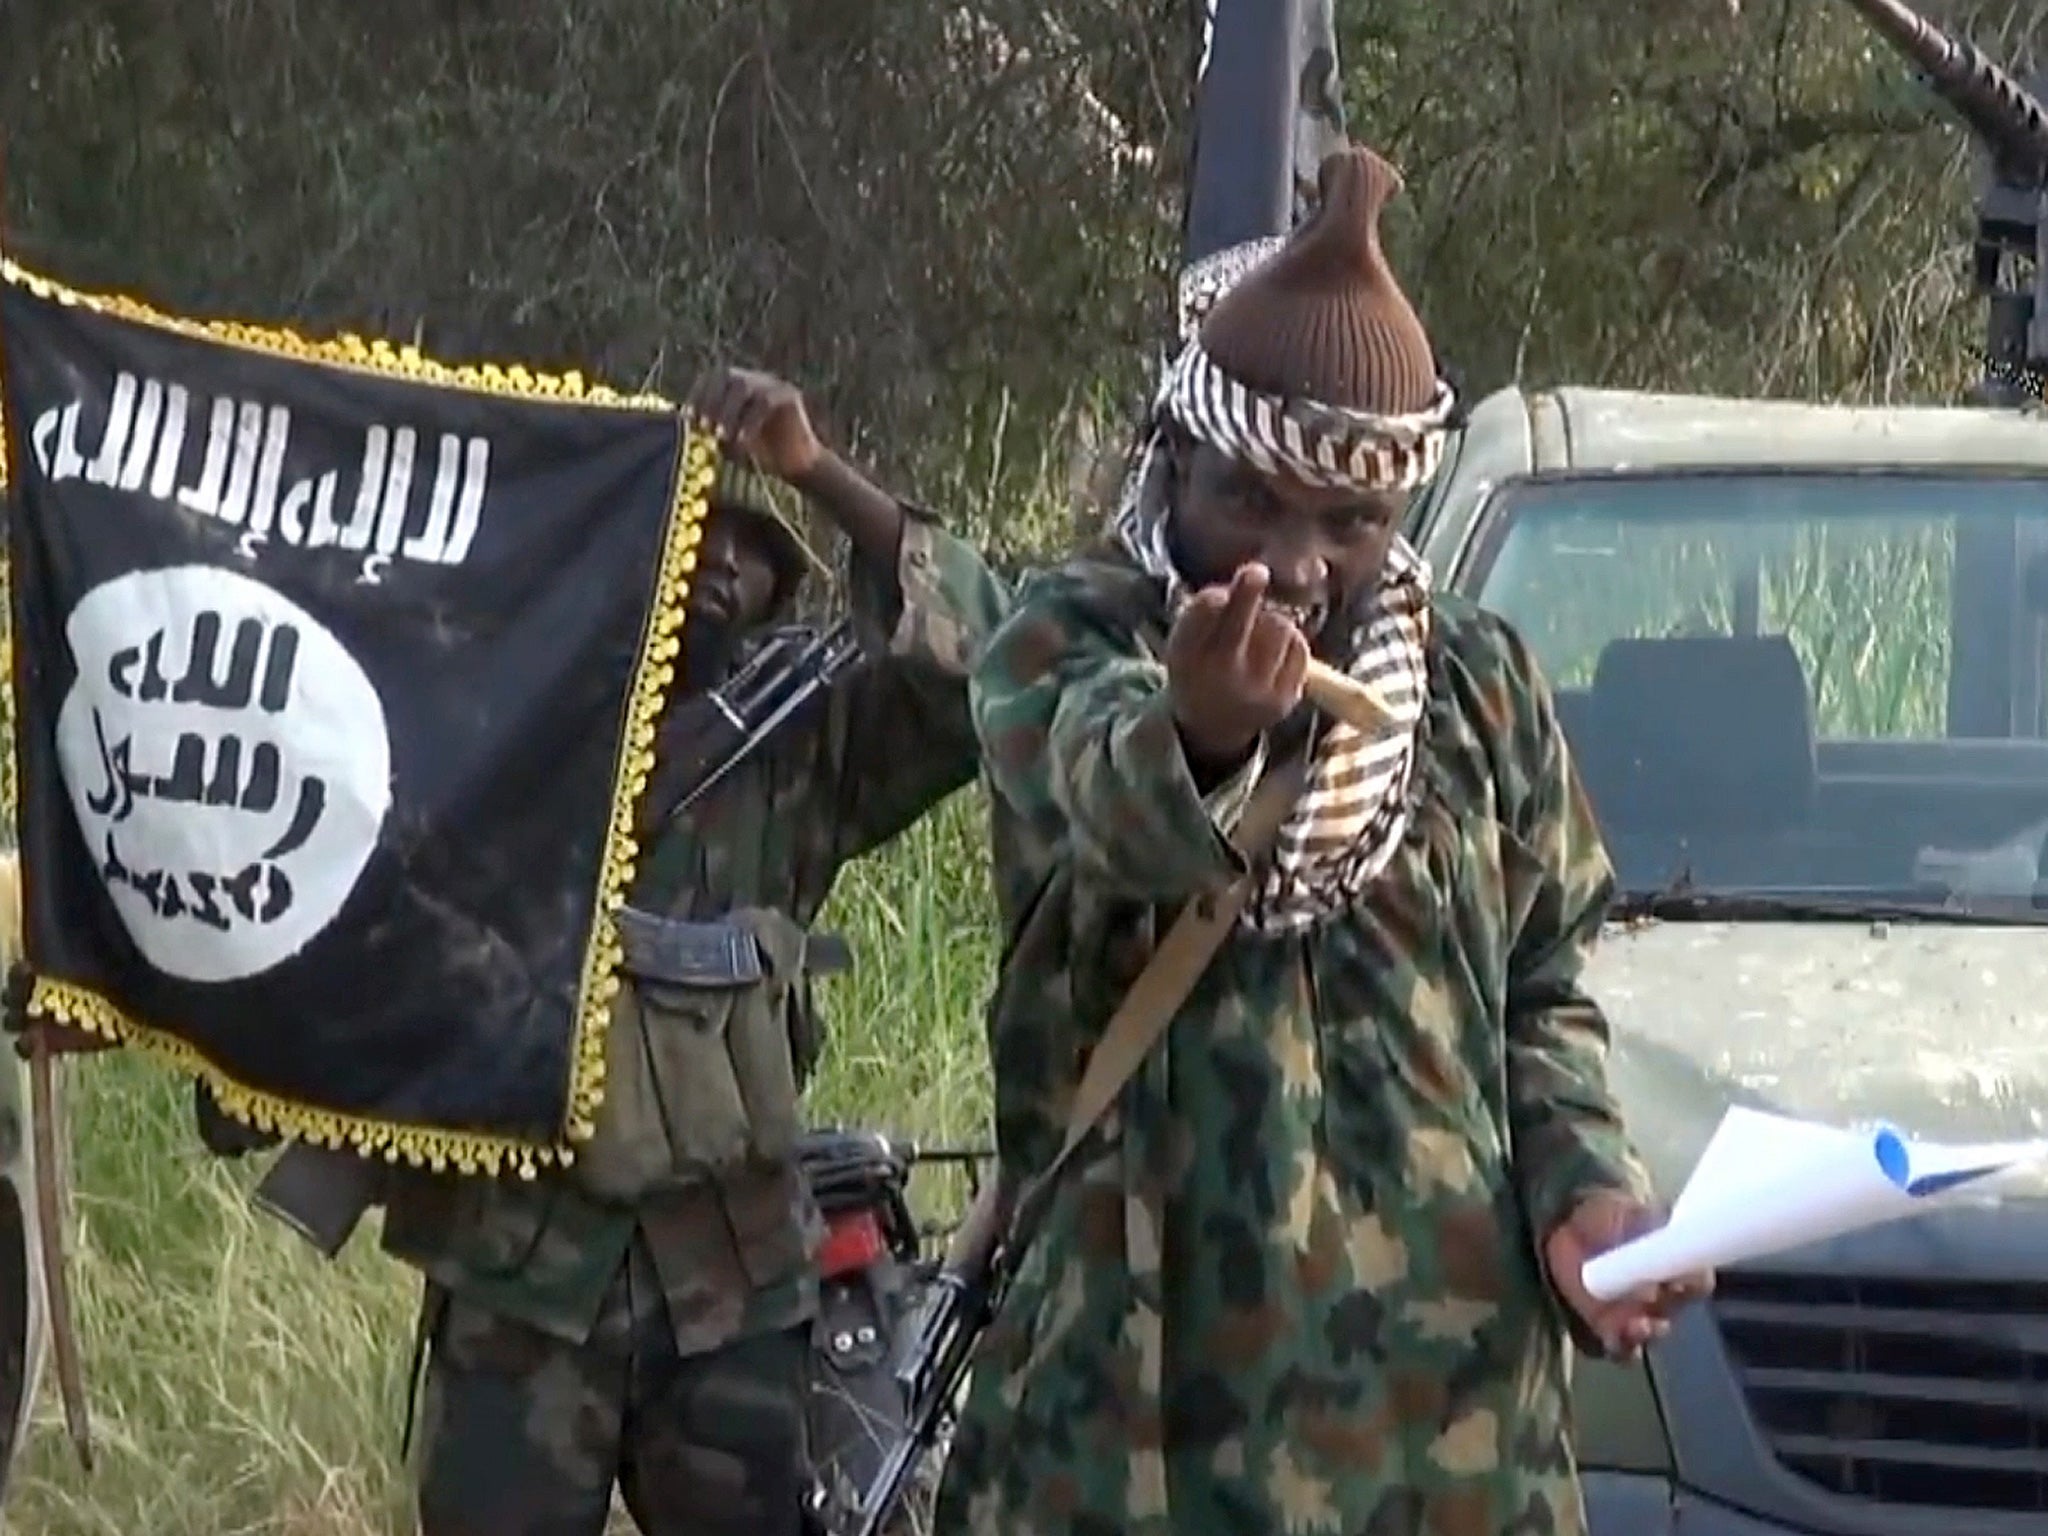 Boko Haram is likely to plot attacks on the West, according to a Nigerian government minister